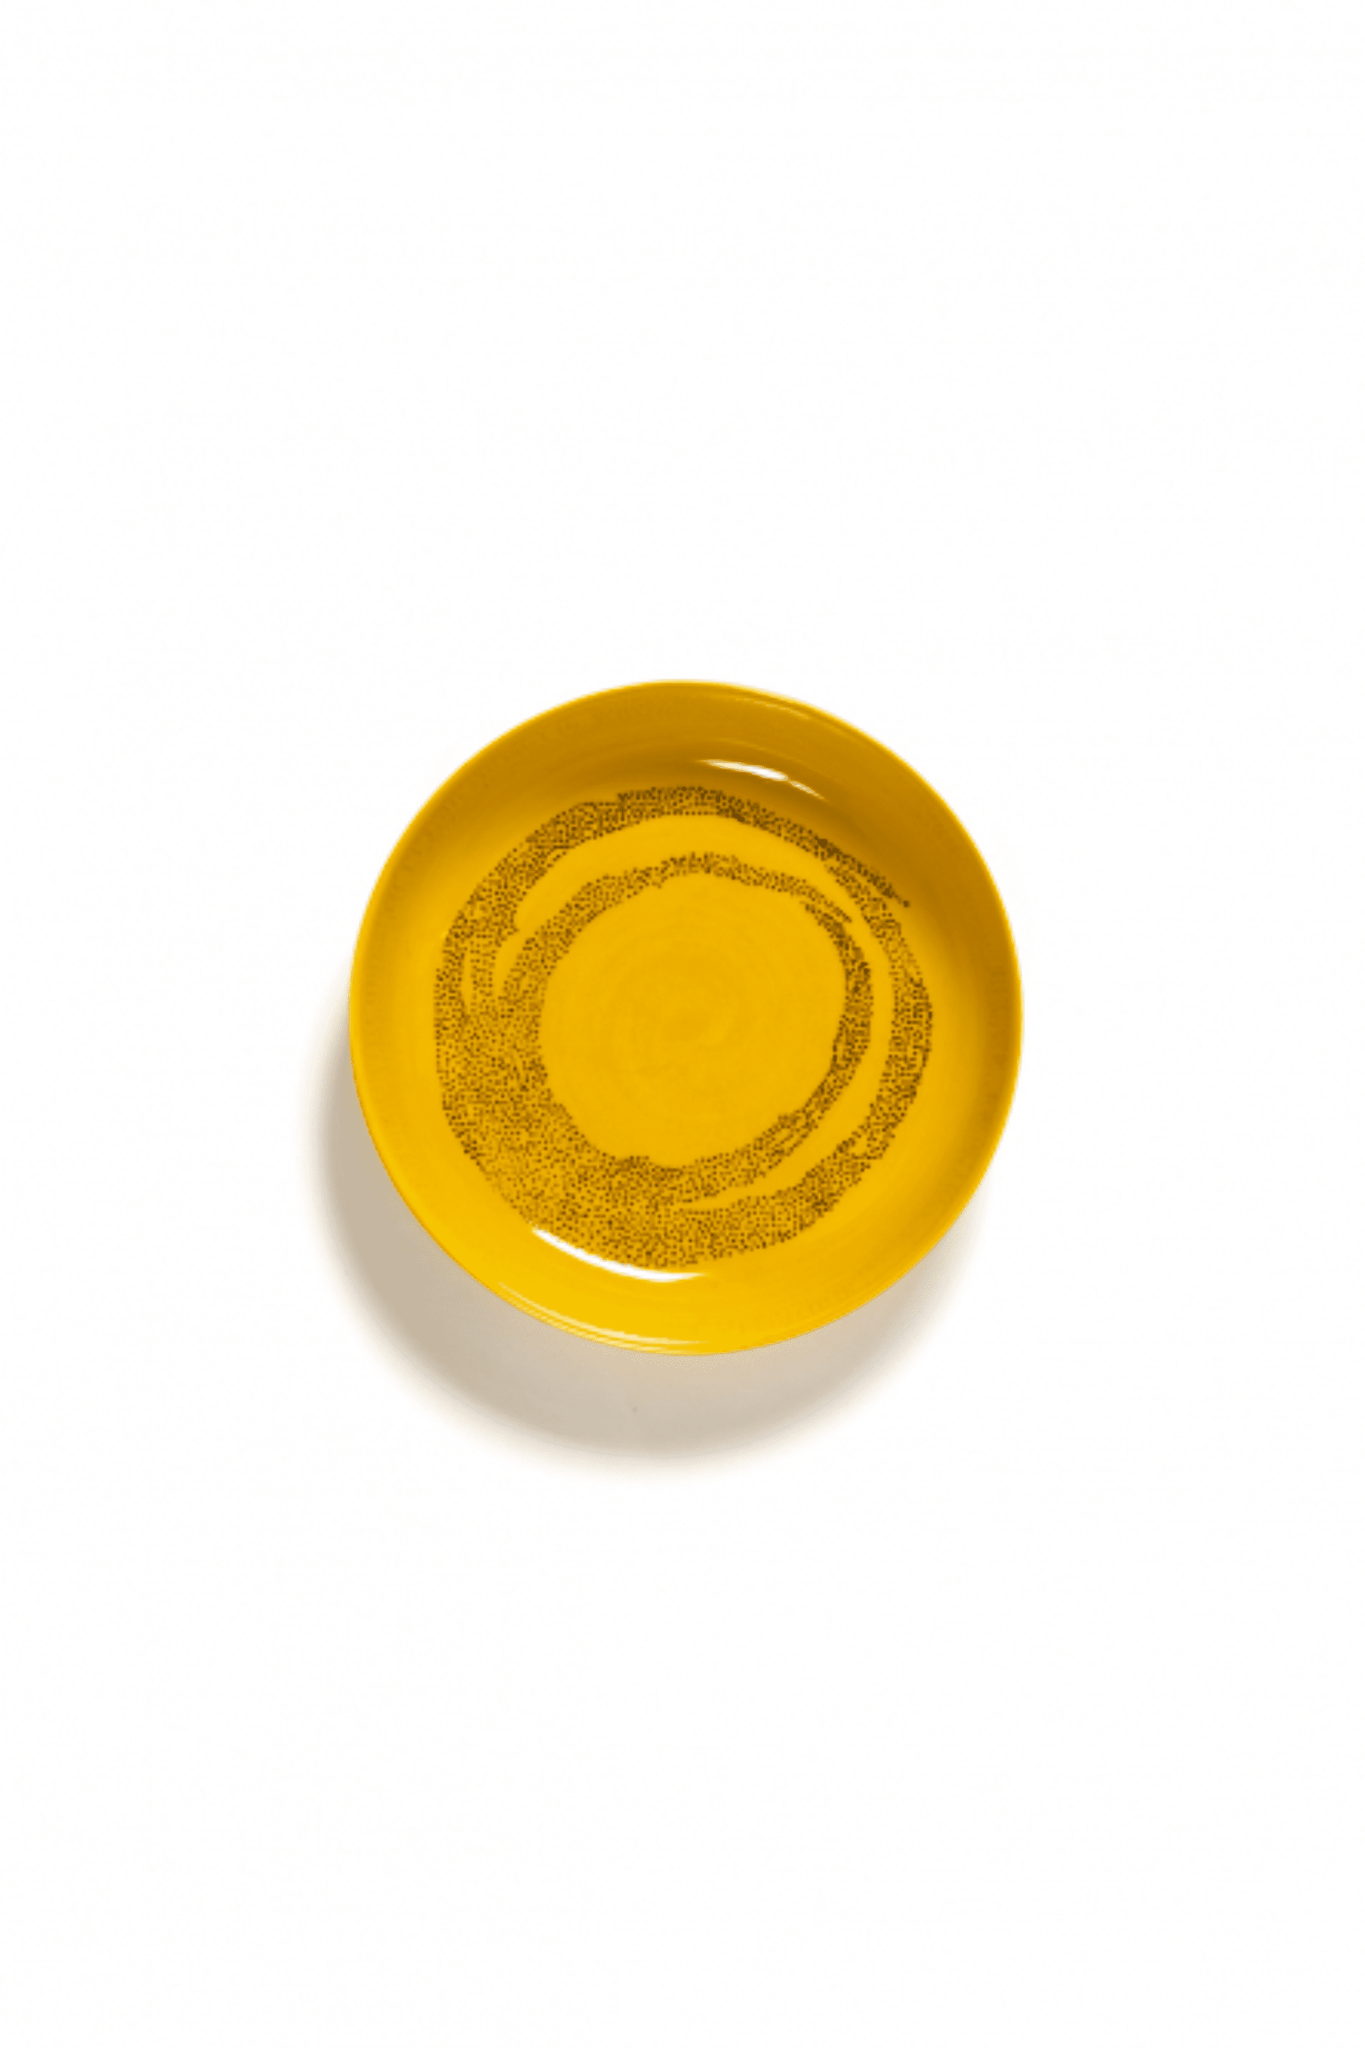 Set of 2 High Plates, Sunny Yellow Swirl with Black Dots Ottolenghi Serax, top view